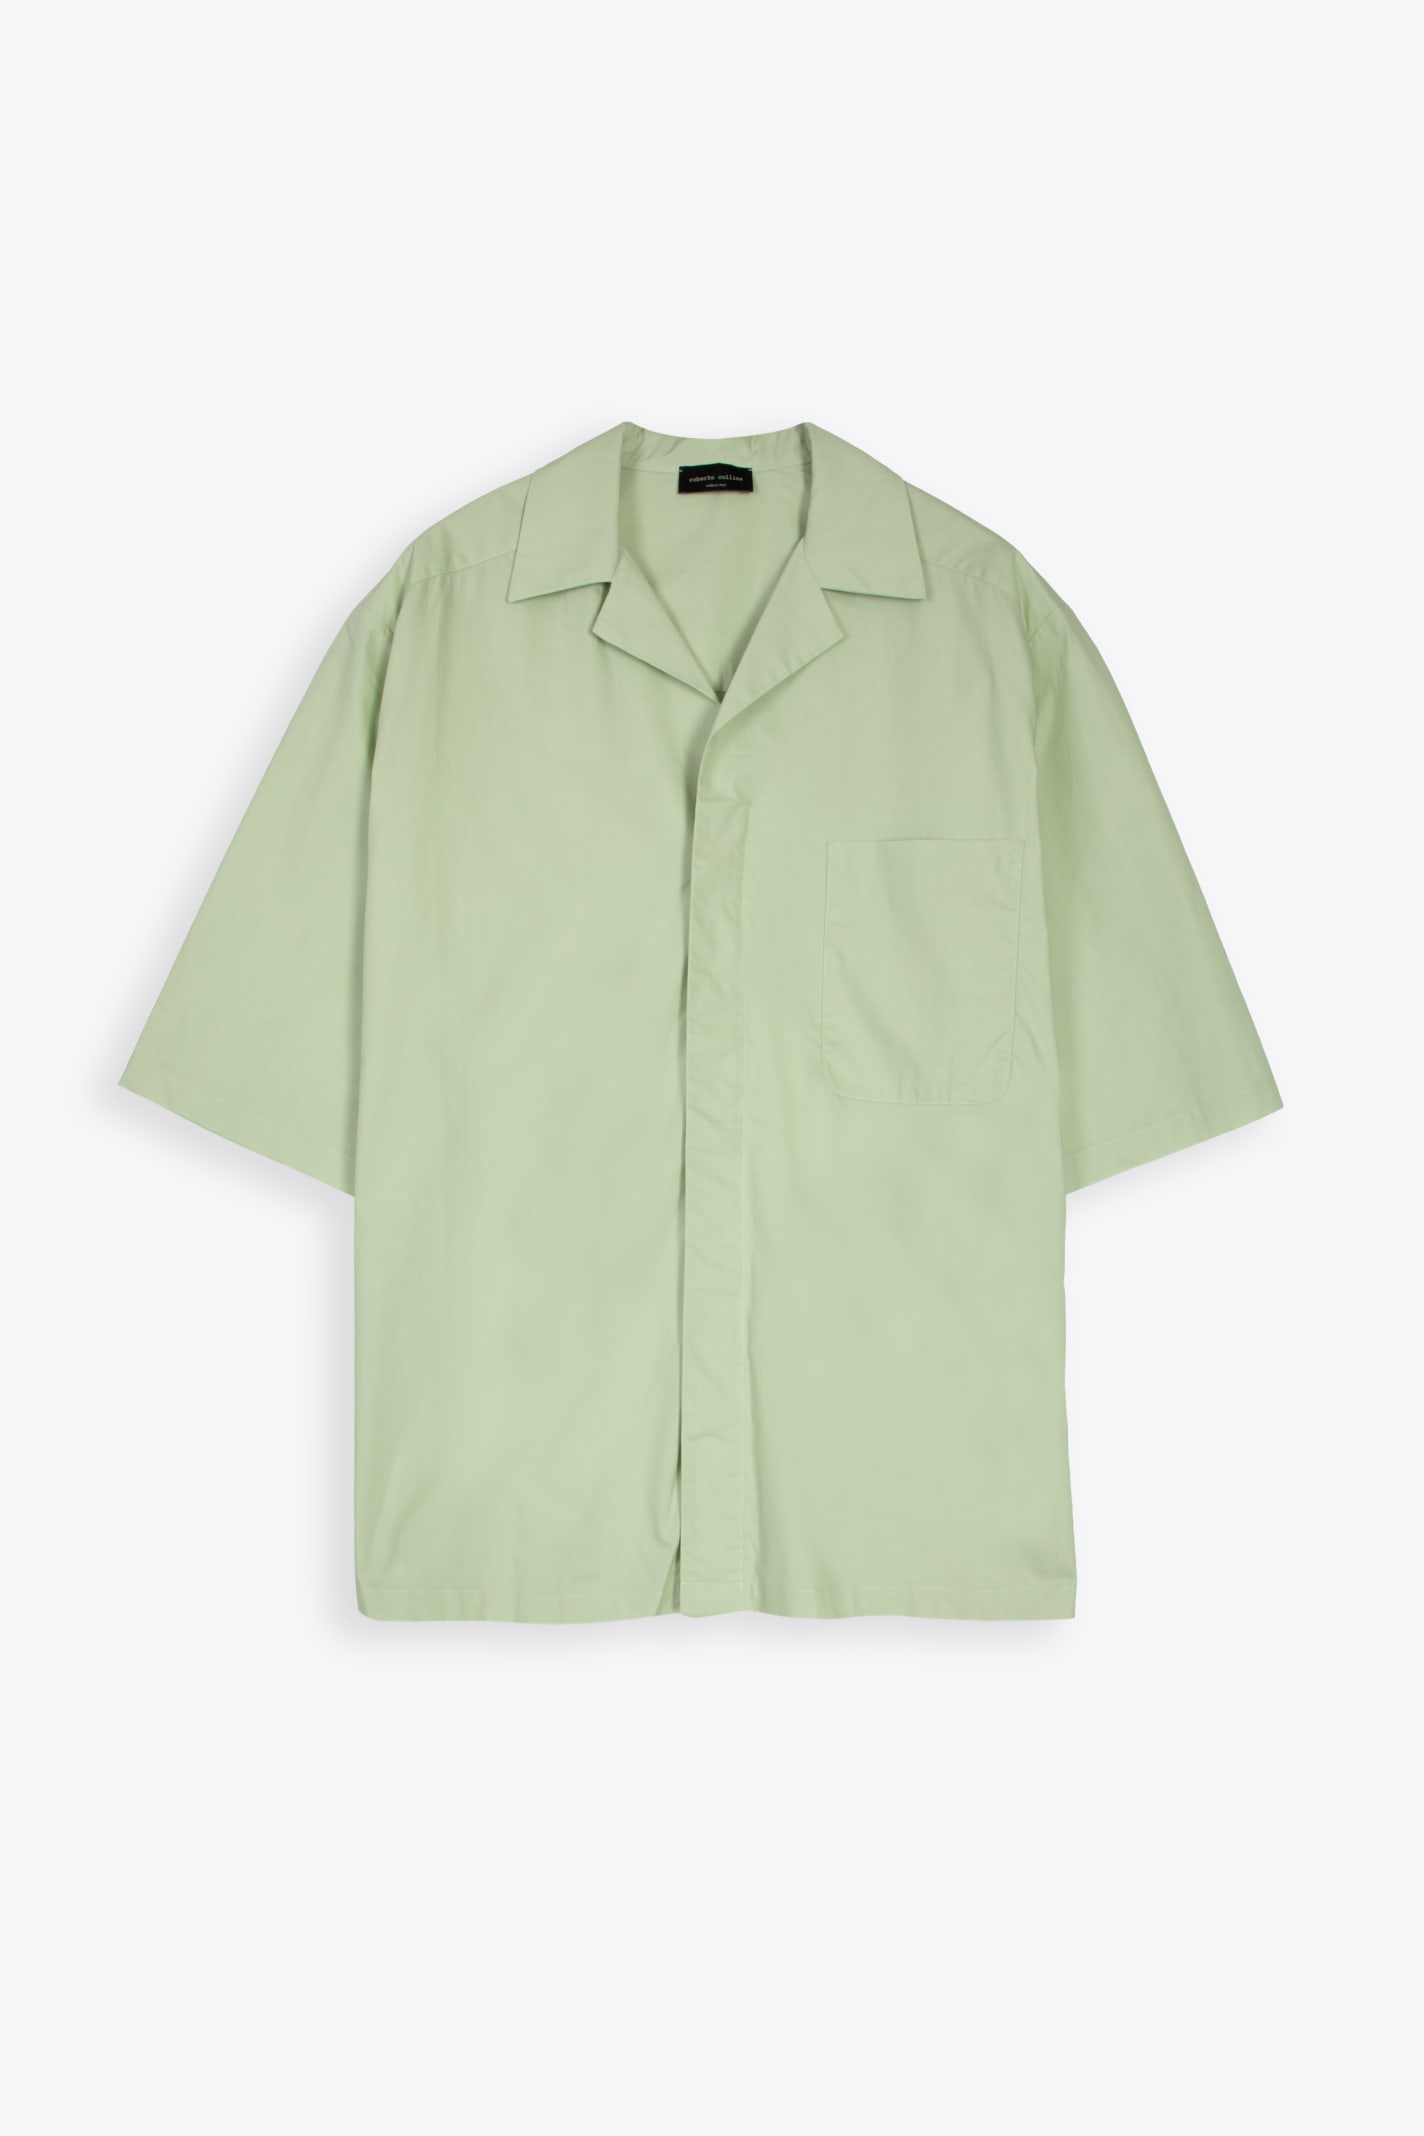 Roberto Collina Camicia Mc Over Popeline Sage Green Poplin Bowling Shirt With Short Sleeves In Verde Acqua